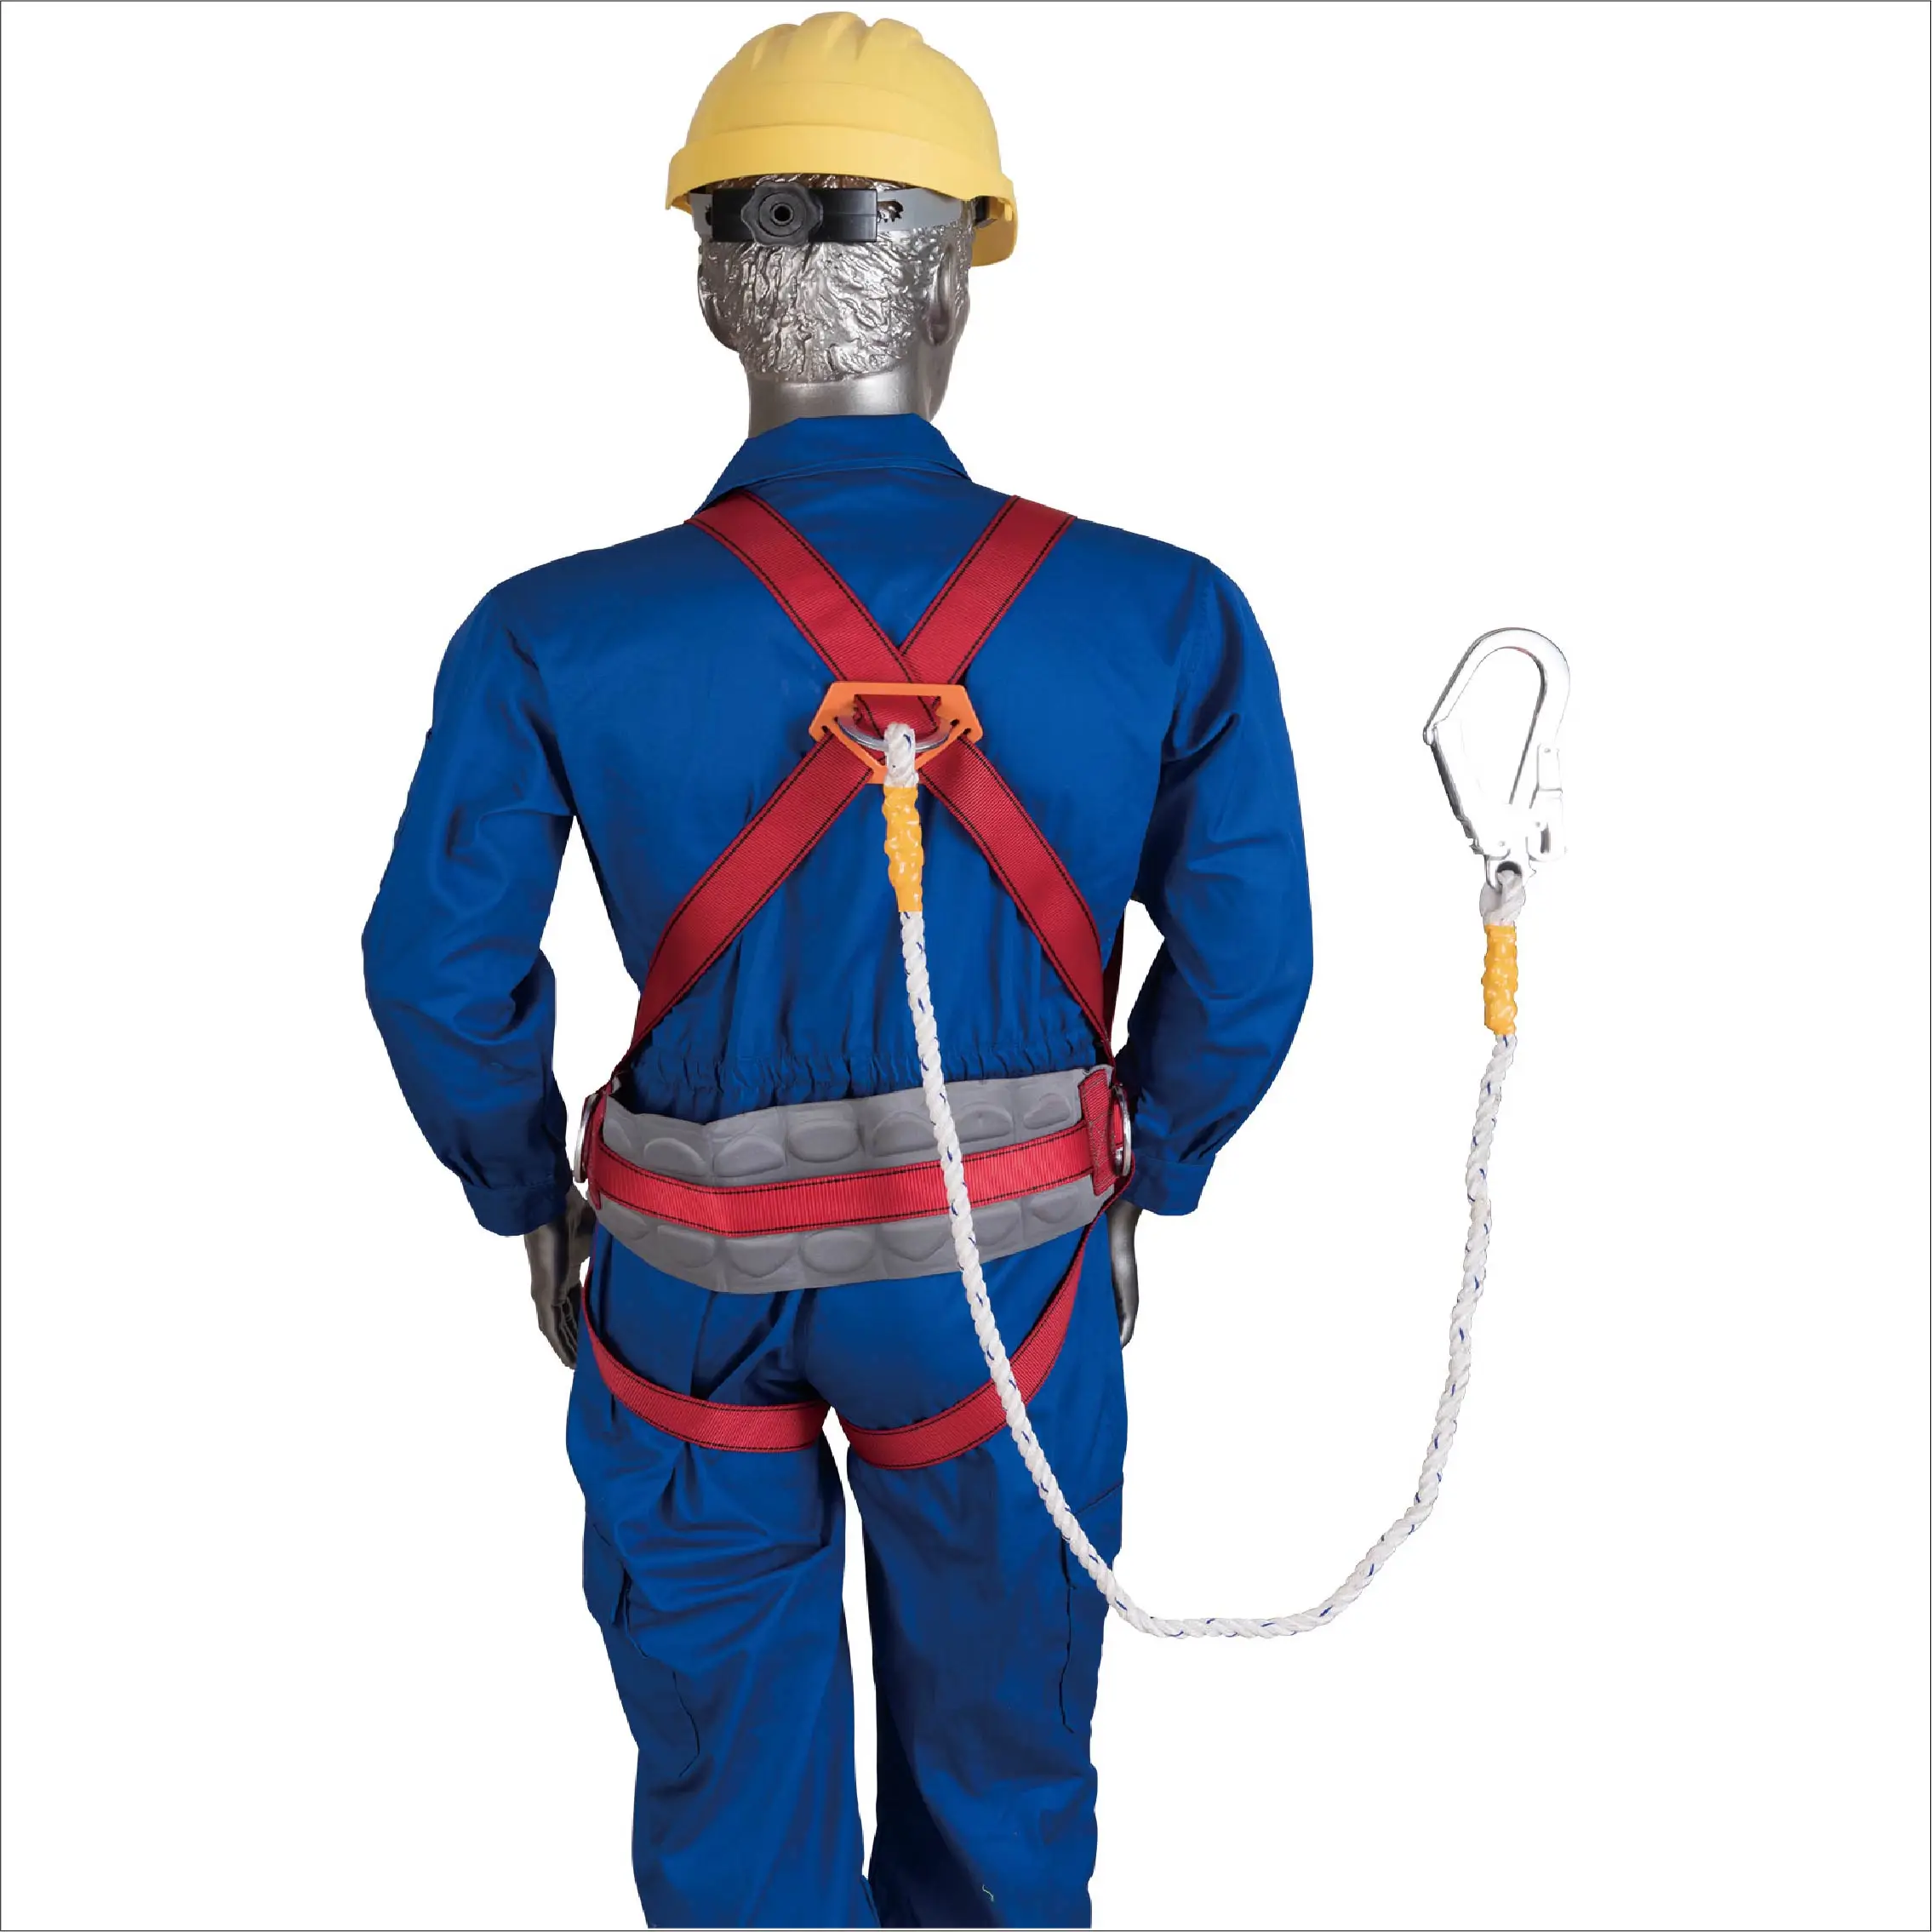 Adjustable fall protection fall arrest safety harness safety belt climbing harness with lanyards and big hooks